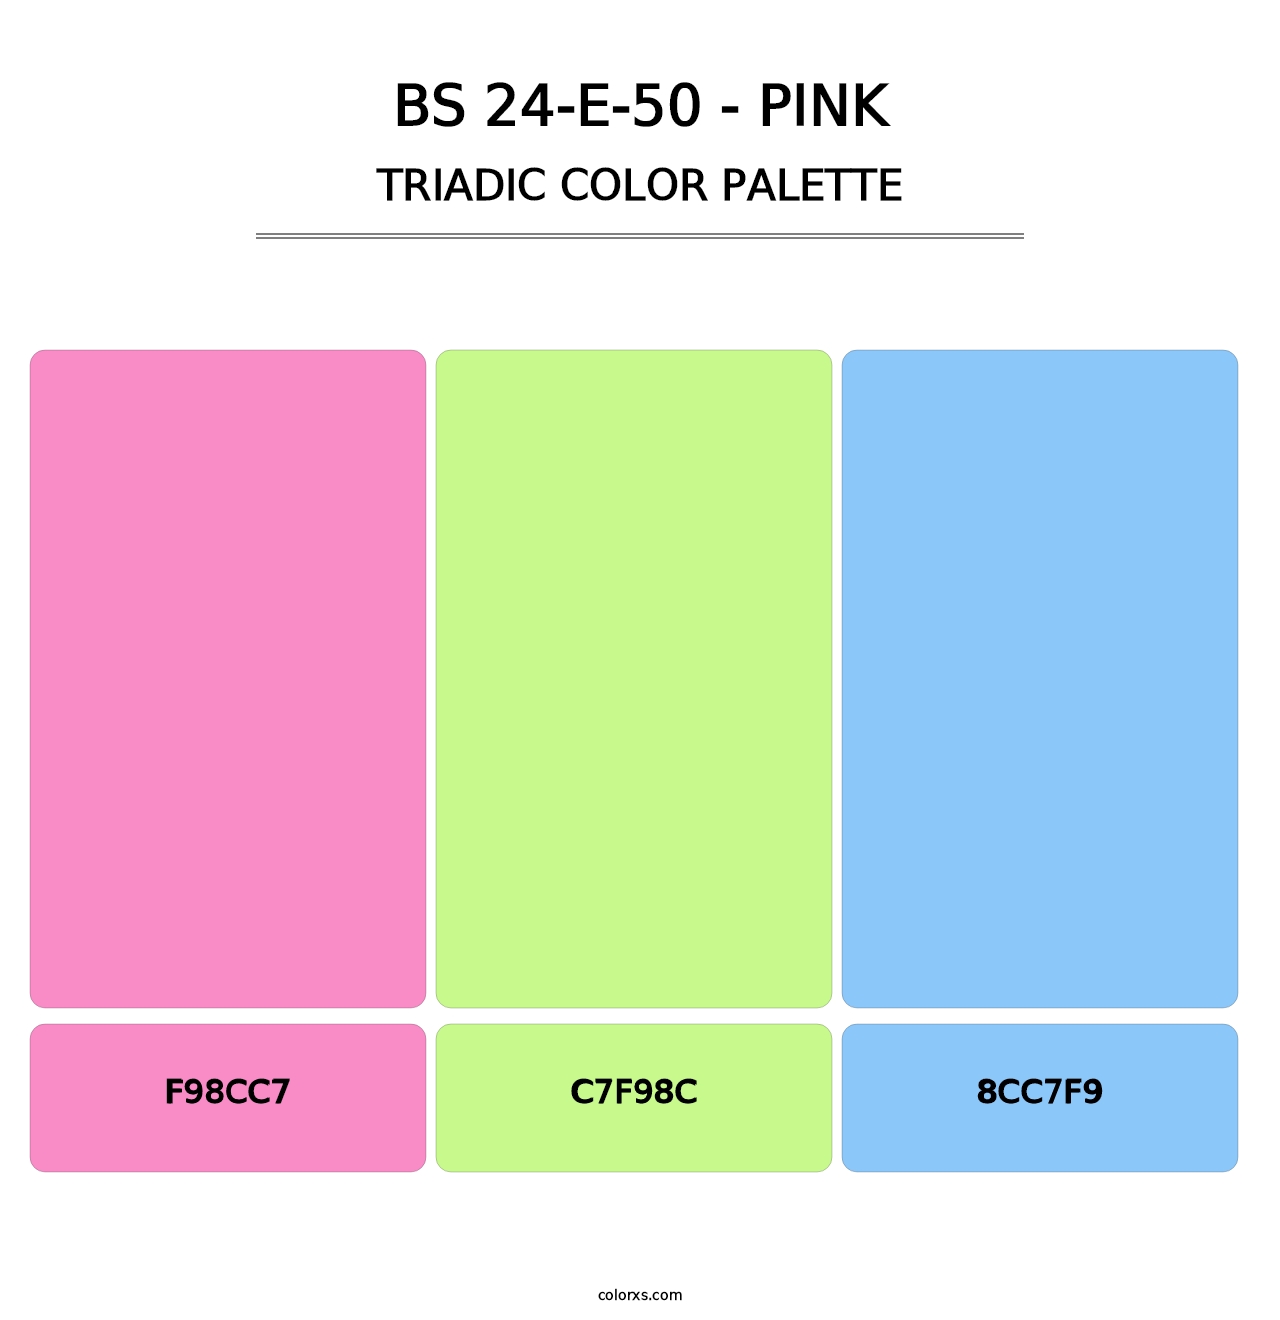 BS 24-E-50 - Pink - Triadic Color Palette